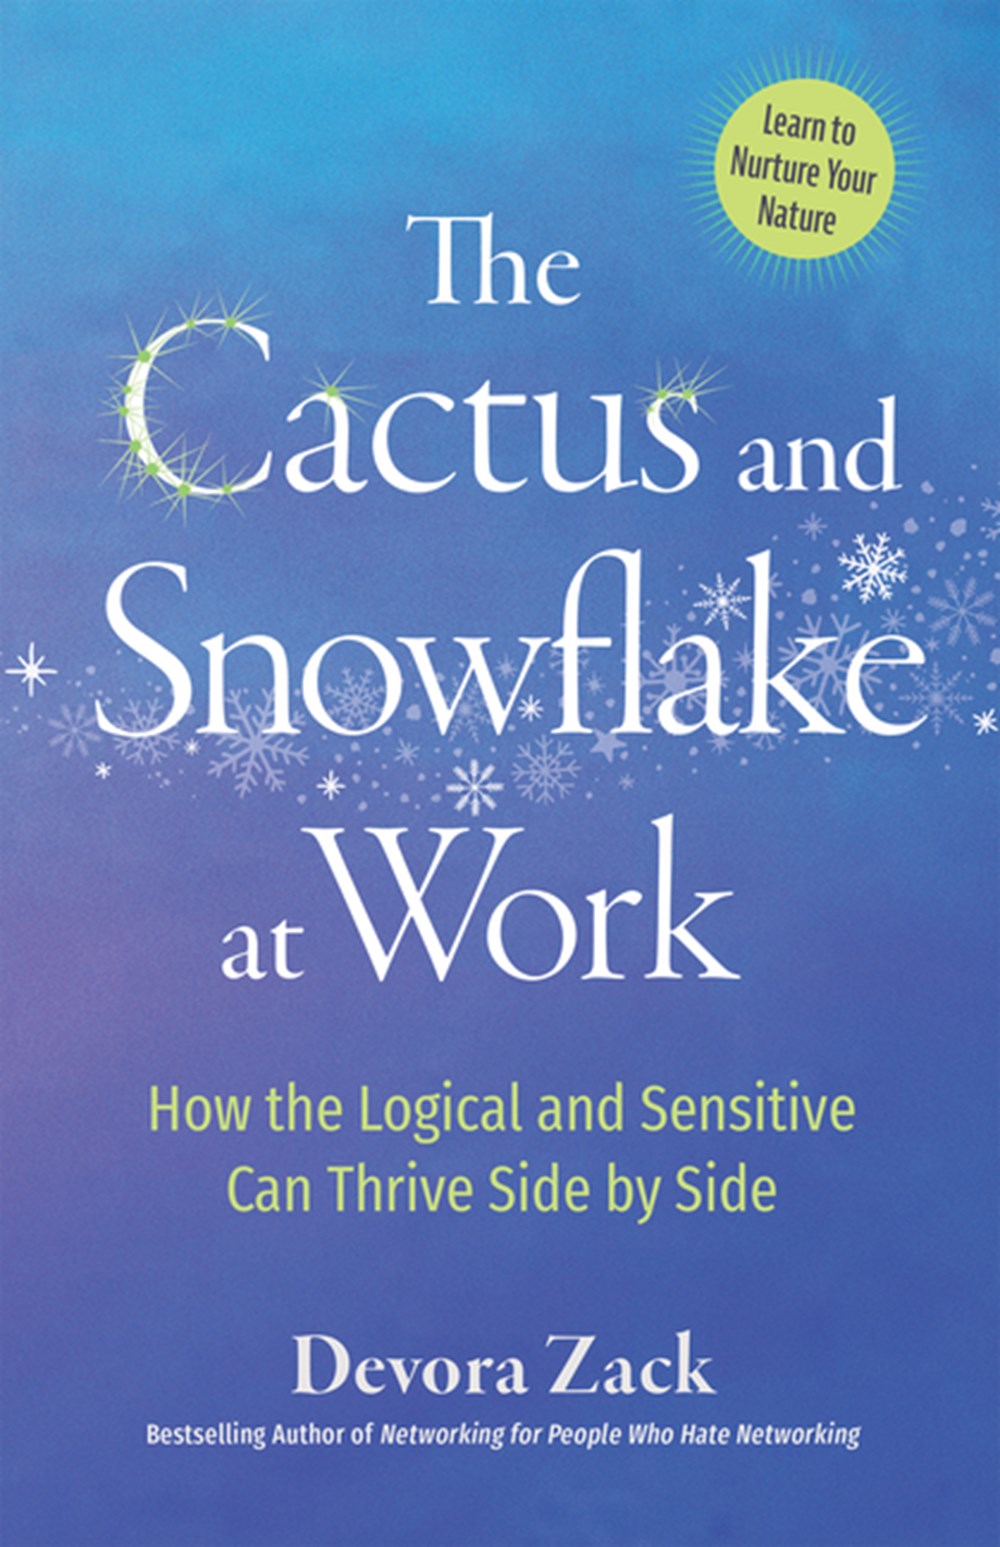 Cactus and Snowflake at Work How the Logical and Sensitive Can Thrive Side by Side